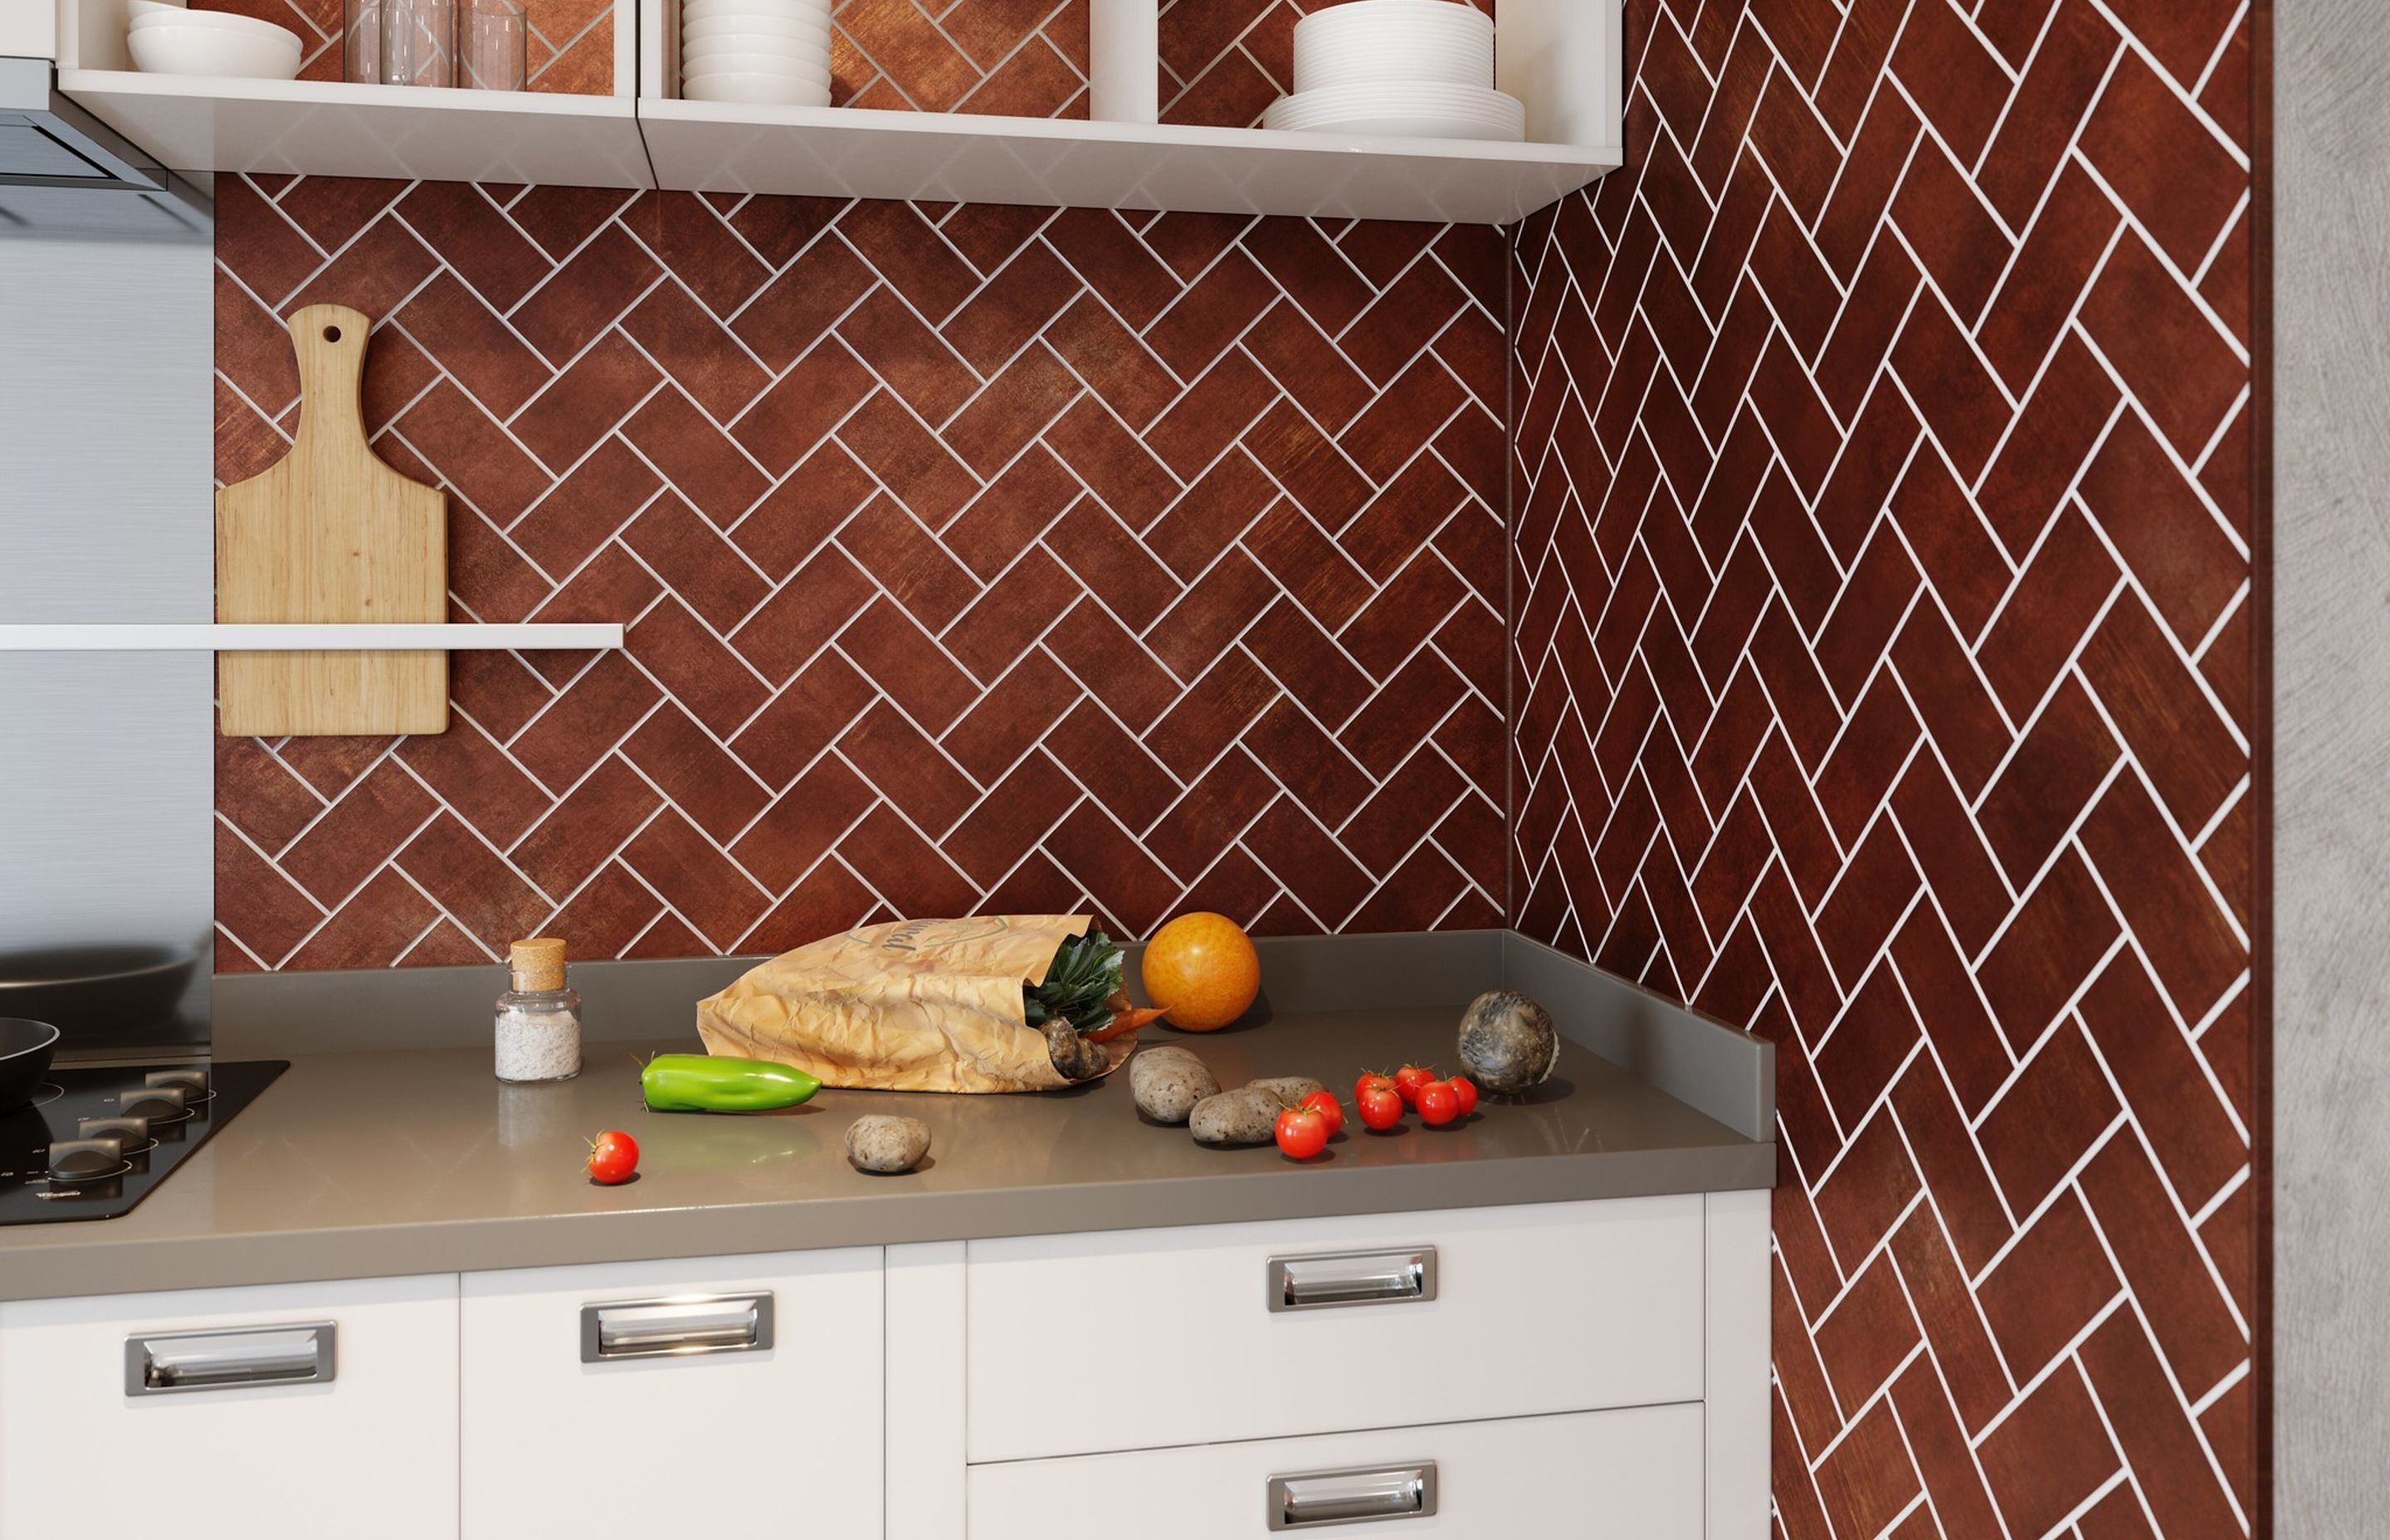 Altro Tegulis – a hygienic wall panel solution with a chic, authentic tile look and feel